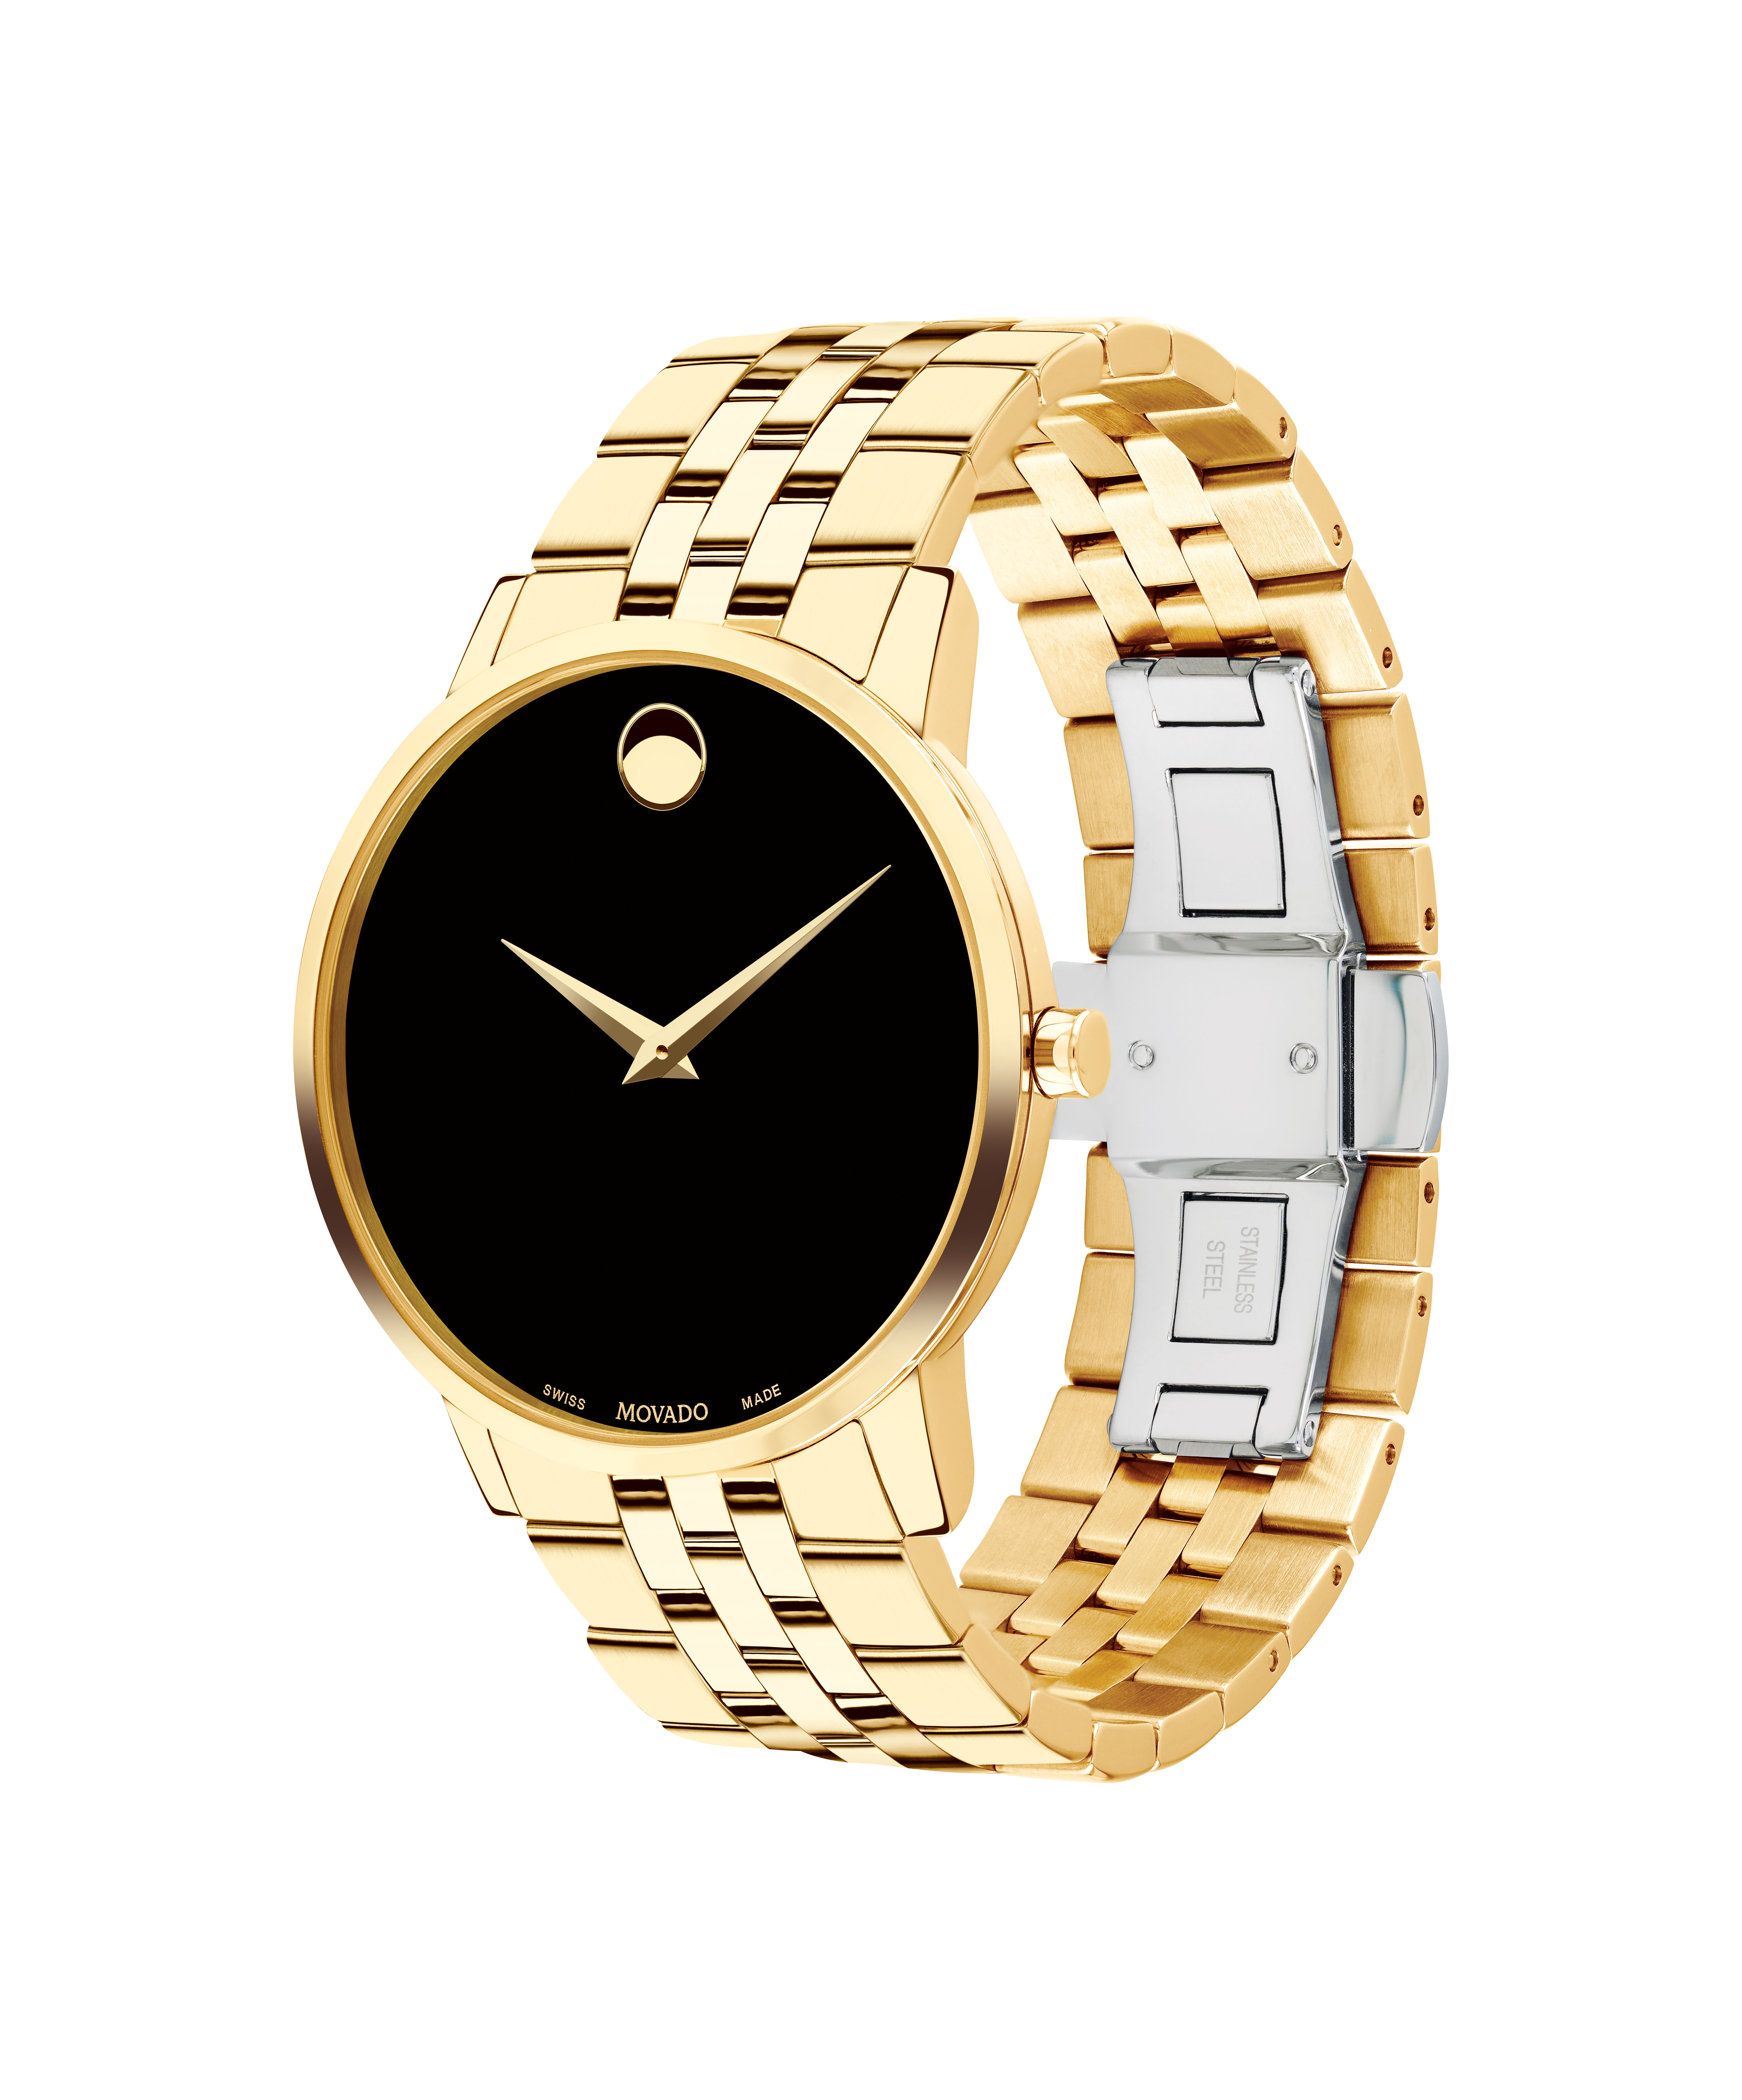 Who Sells Best Replica Watch Site Reviews